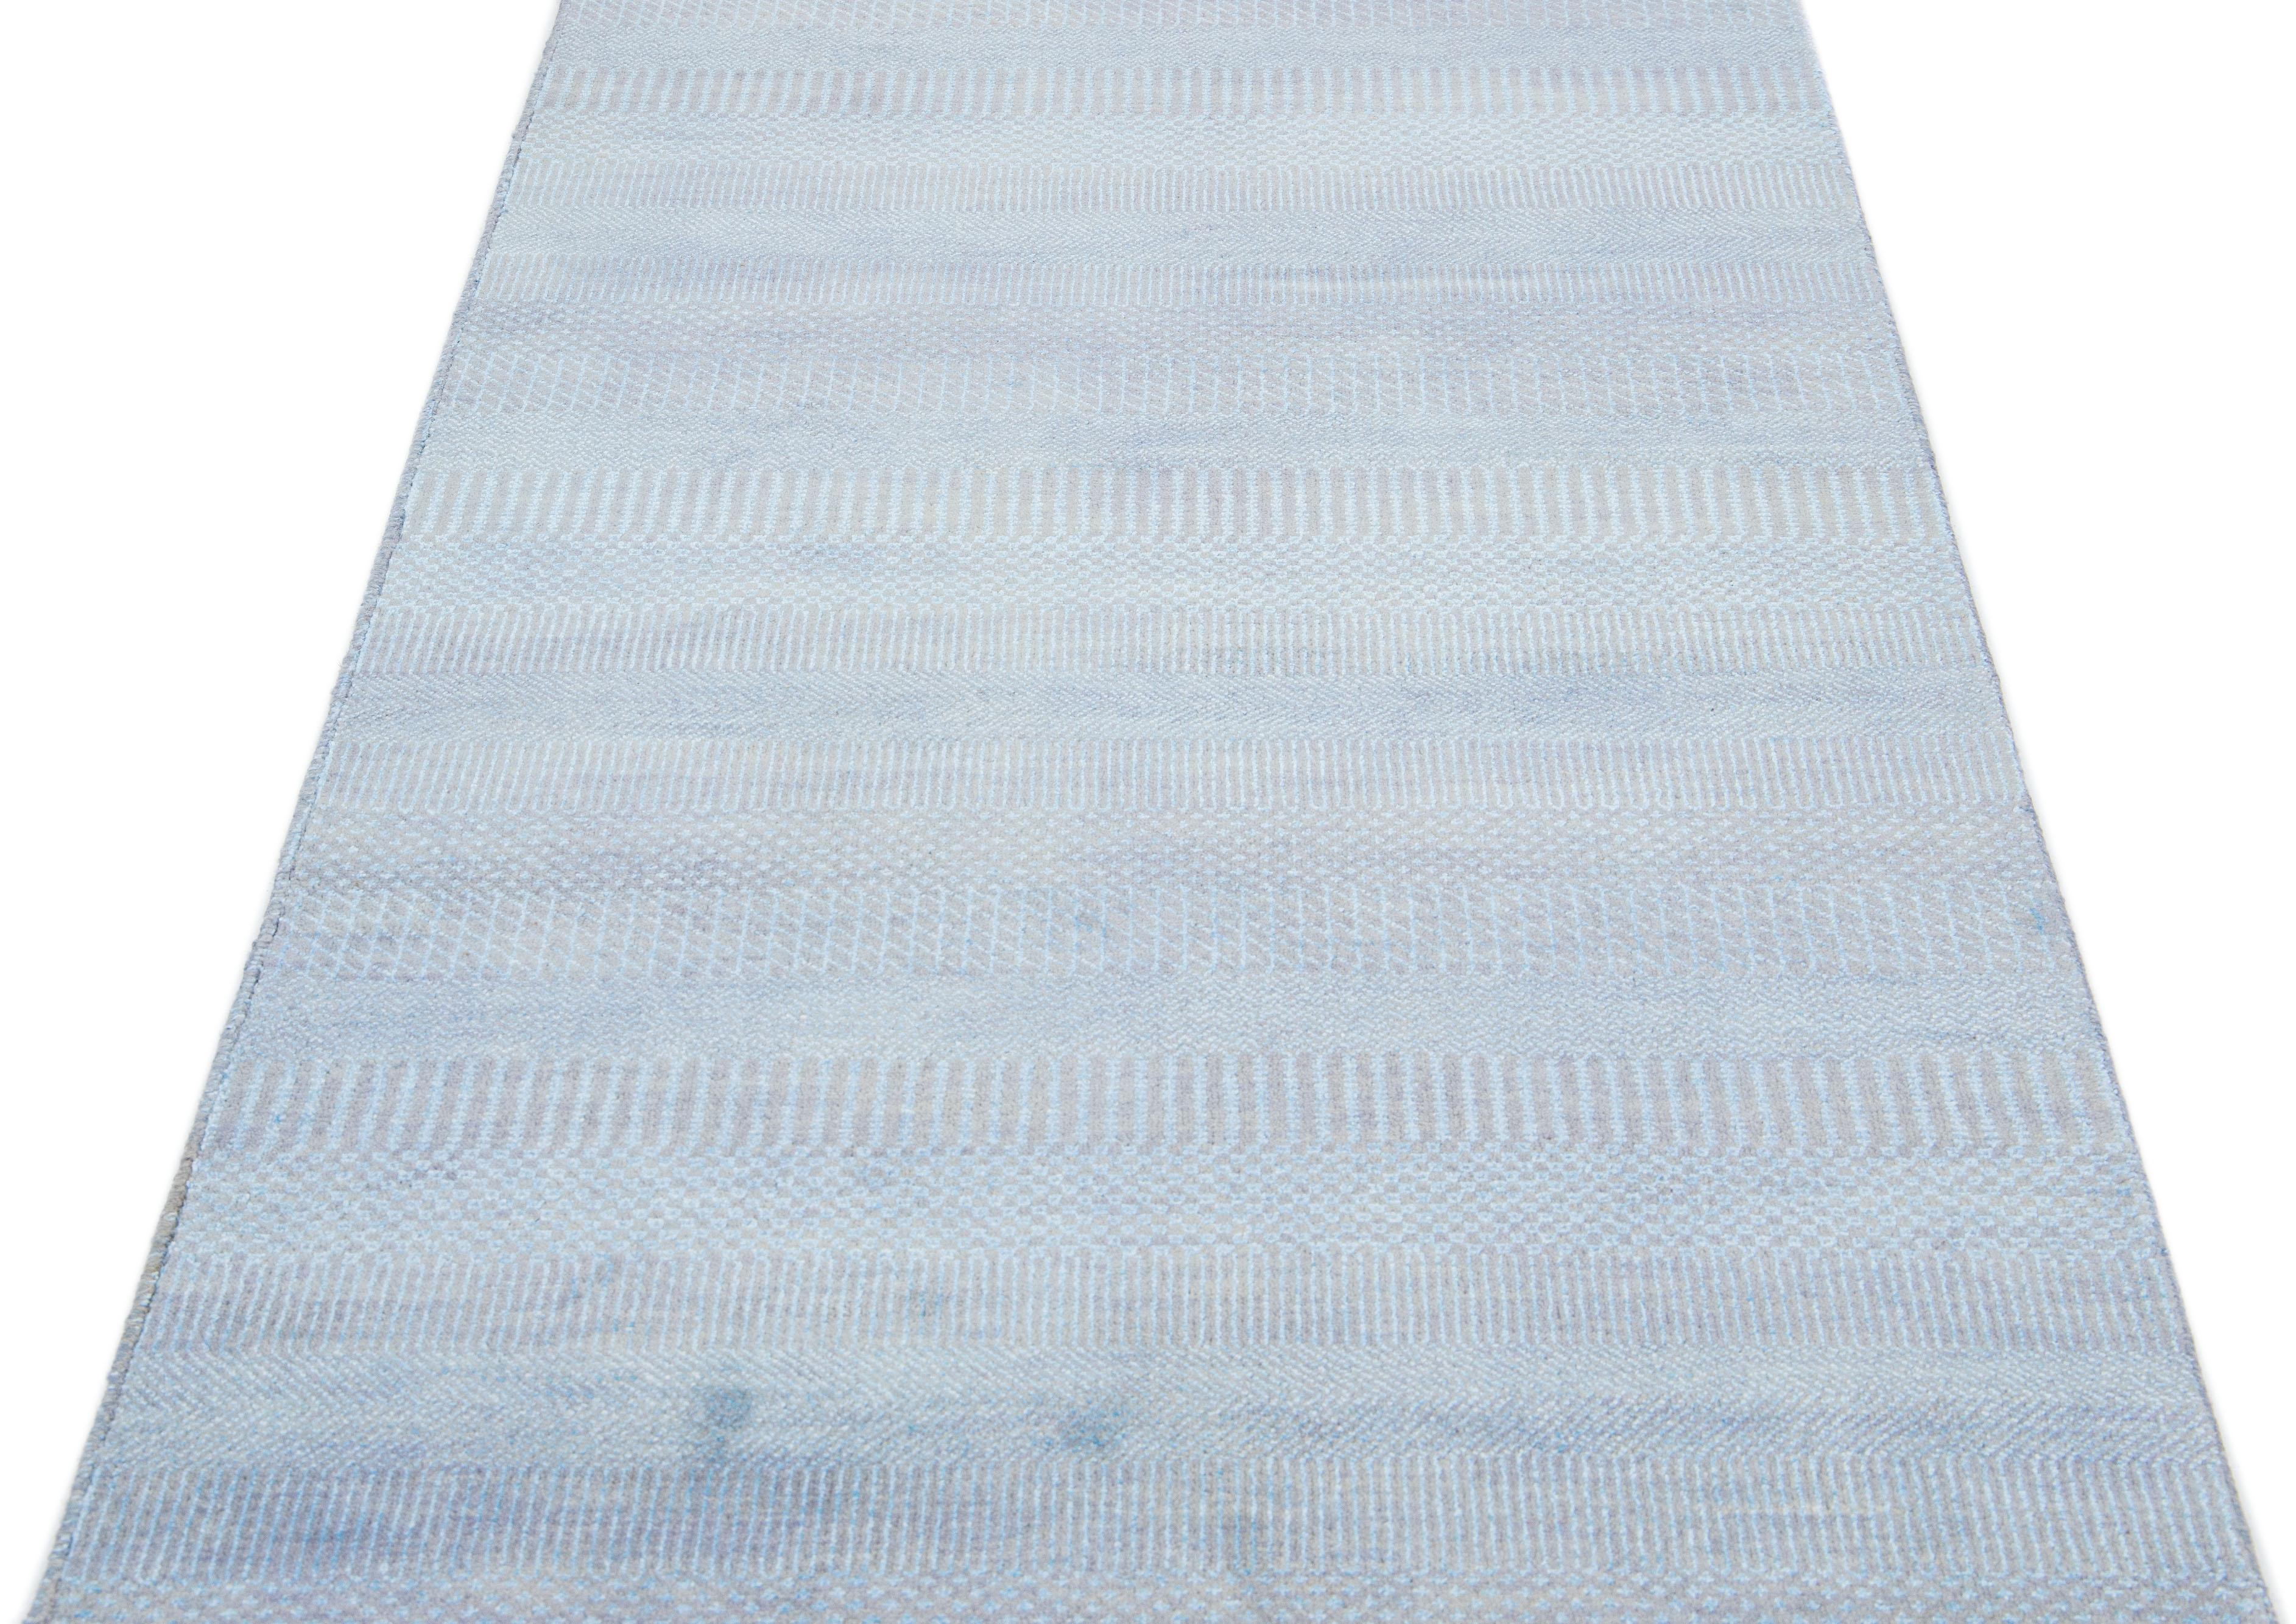 This long hand-knotted rug is made of wool. It features a subtle light blue color scheme accented by an all-over geometric pattern—an ideal addition to any contemporary interior.

This rug measures 3'5